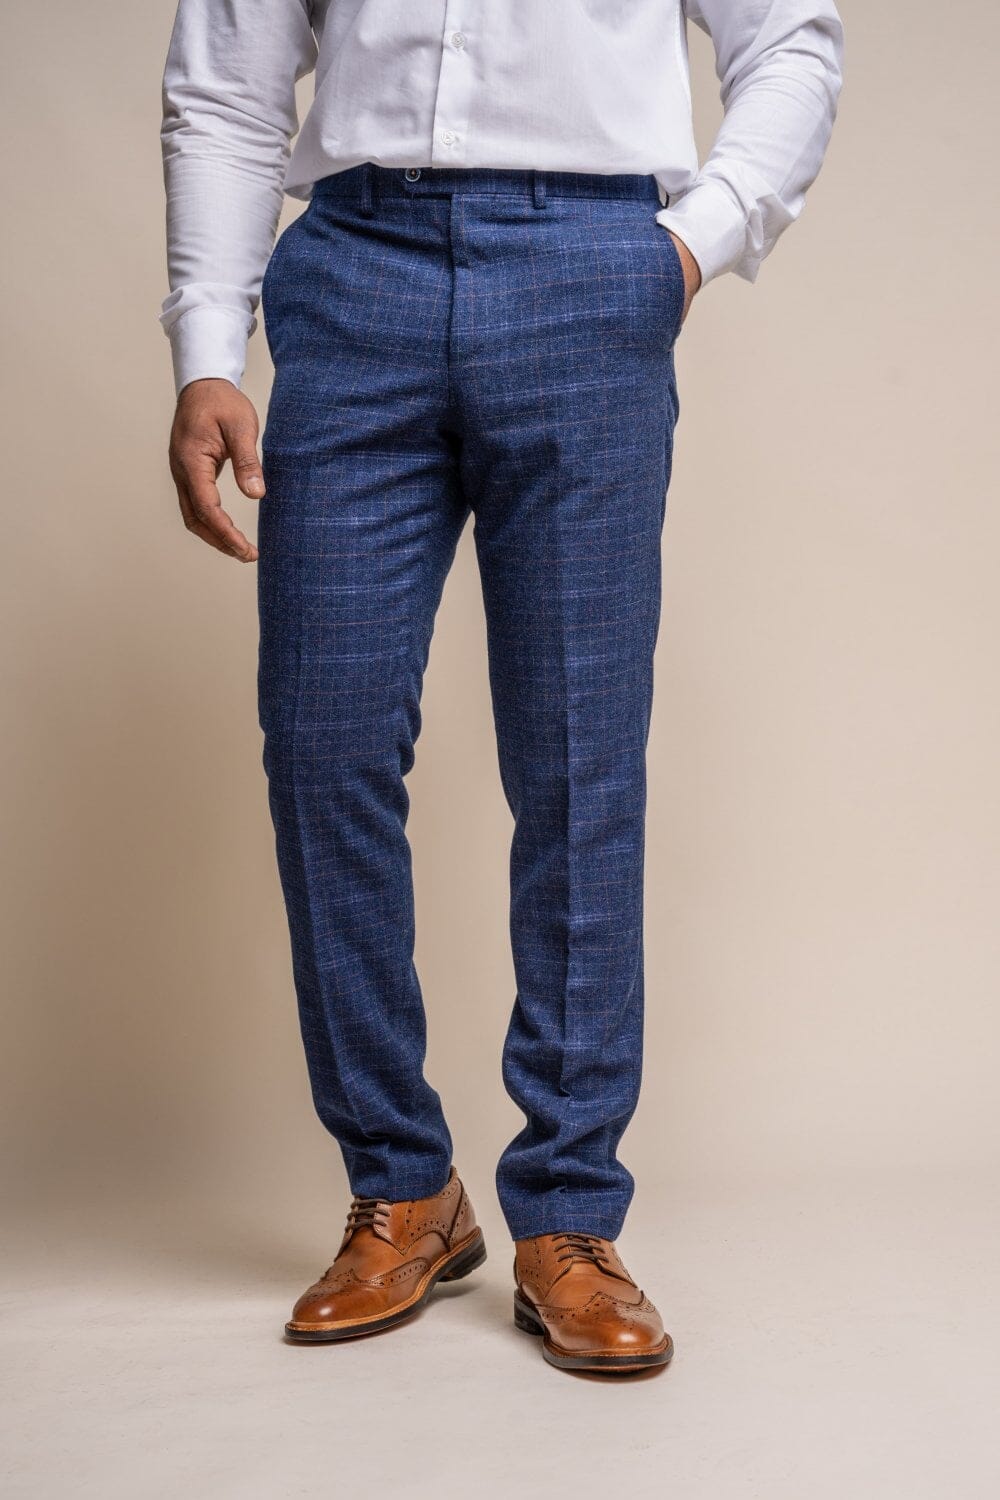 Kaiser Blue Check Tweed Trousers - Trousers - 28R - THREADPEPPER